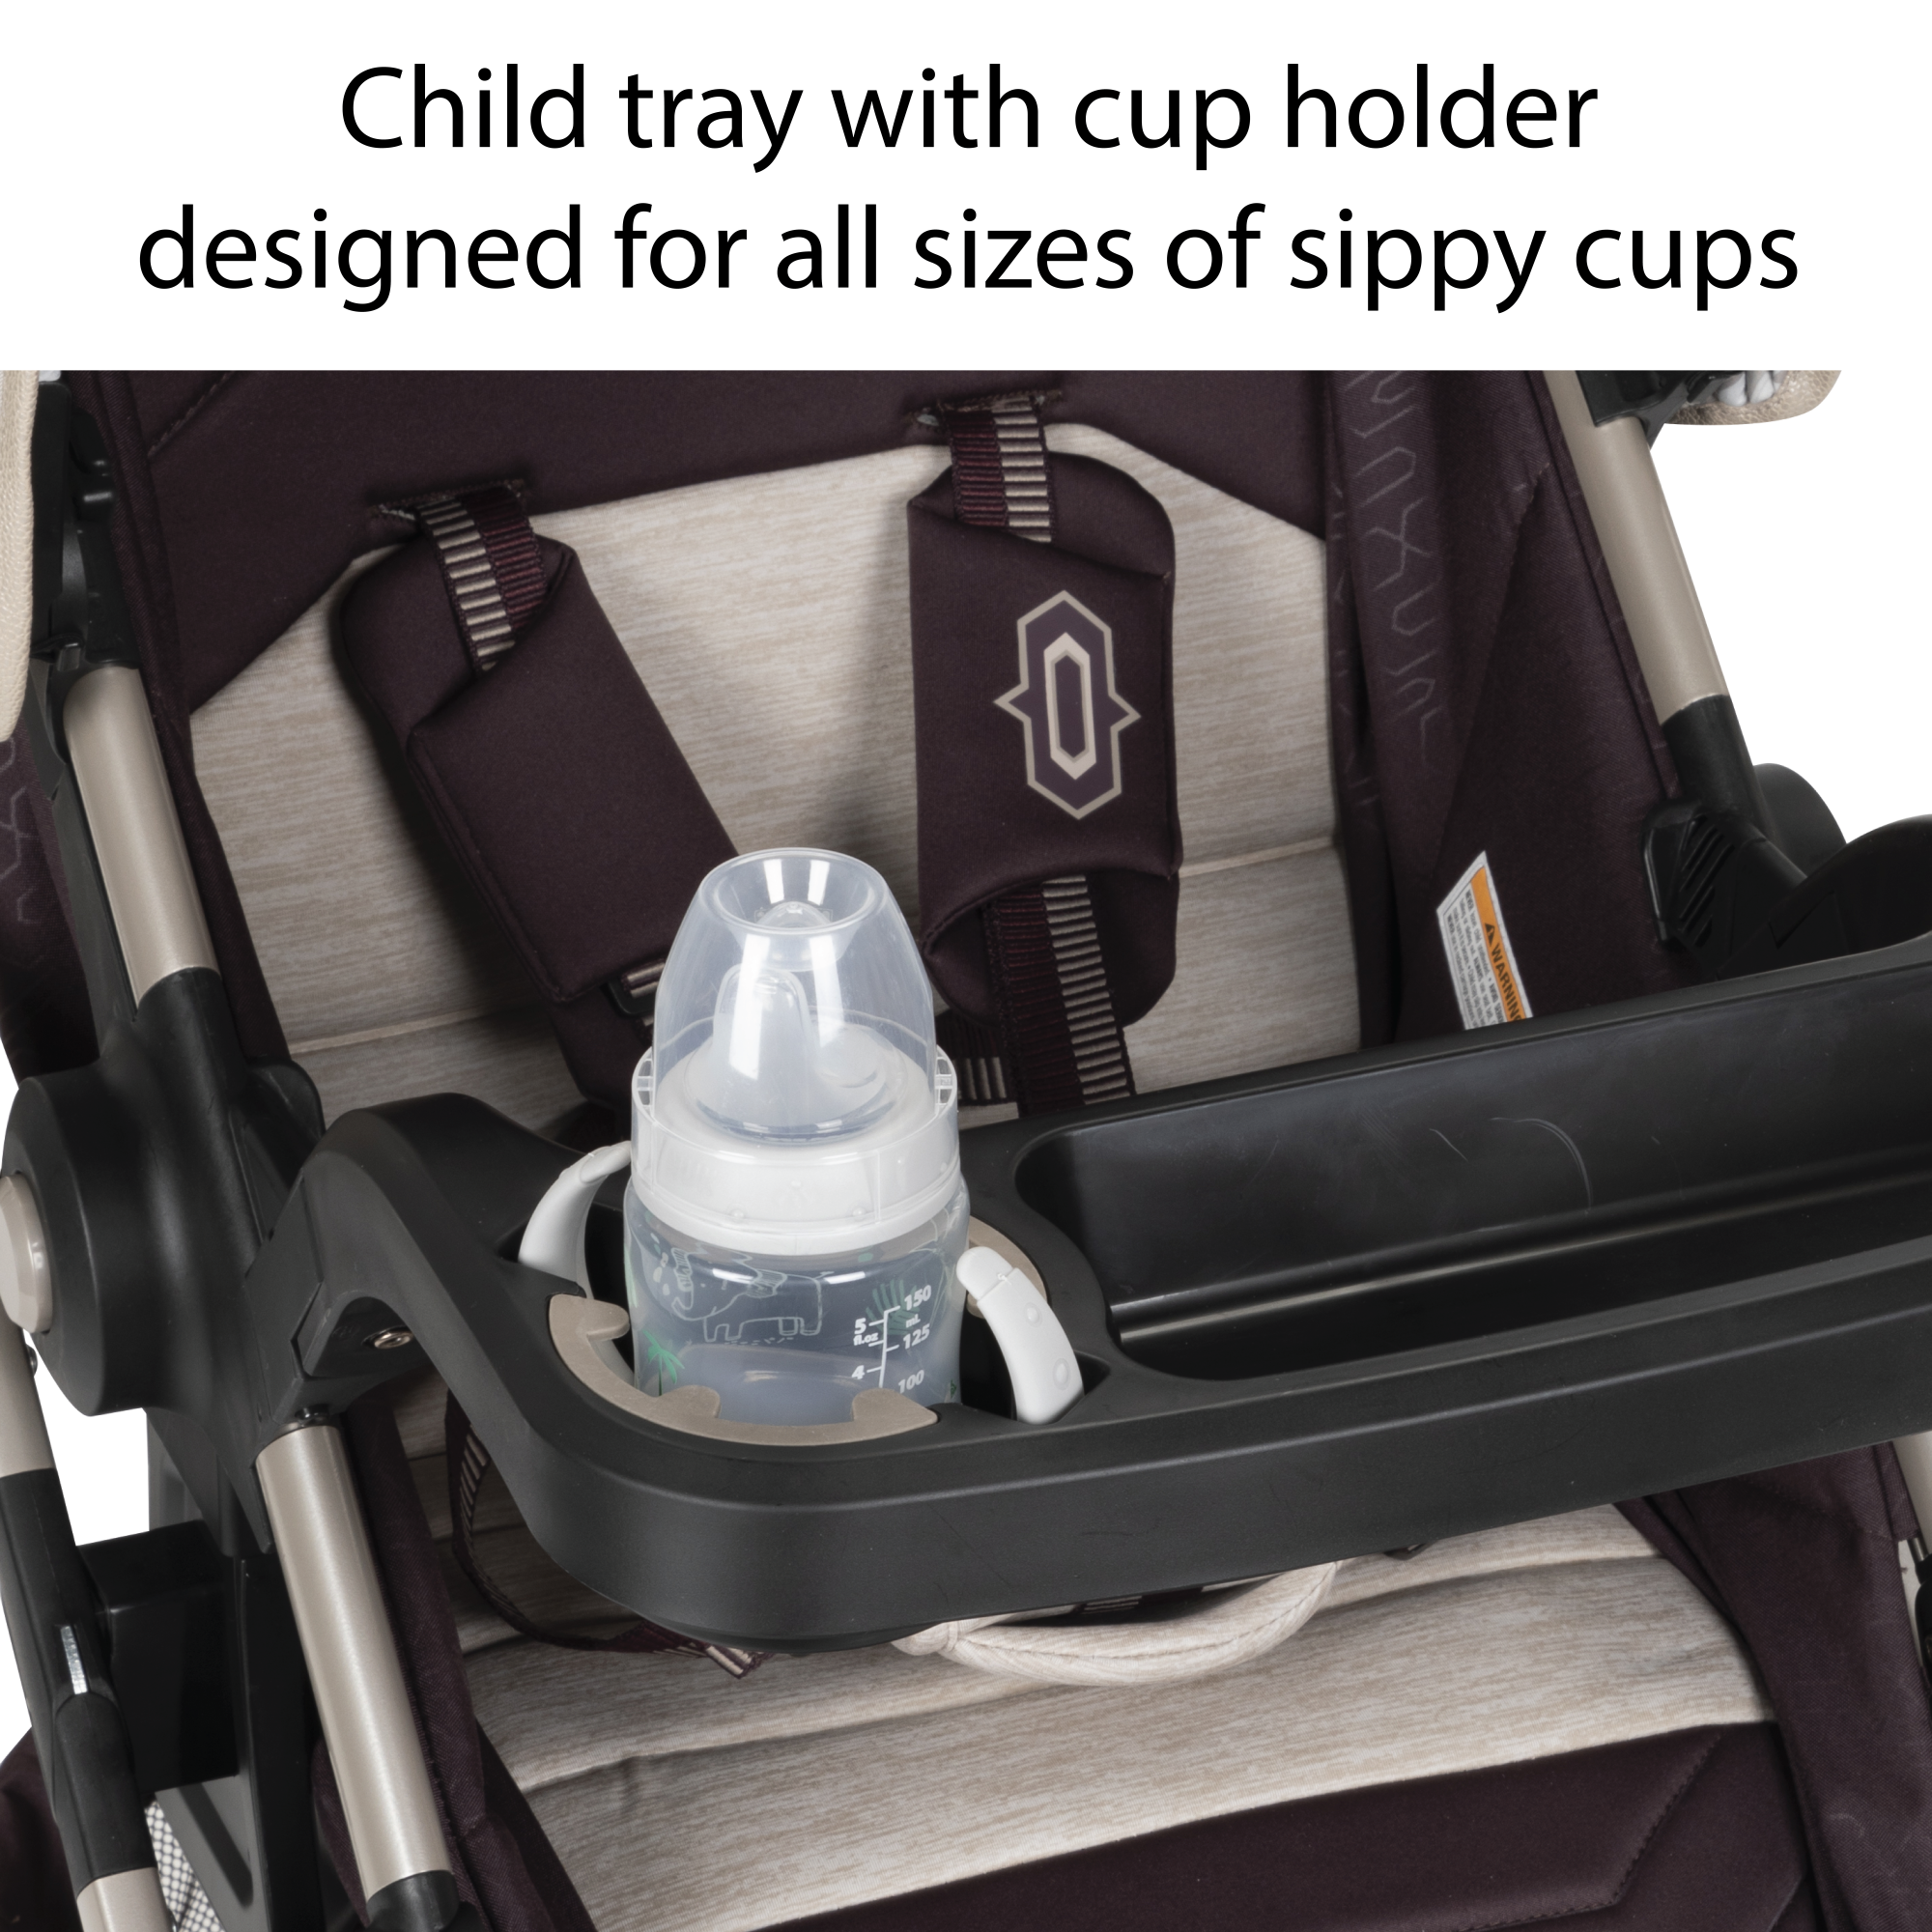 Deluxe Grow and Go™ Flex 8-in-1 Travel System - child tray with cup holder designed for all sizes of sippy cups